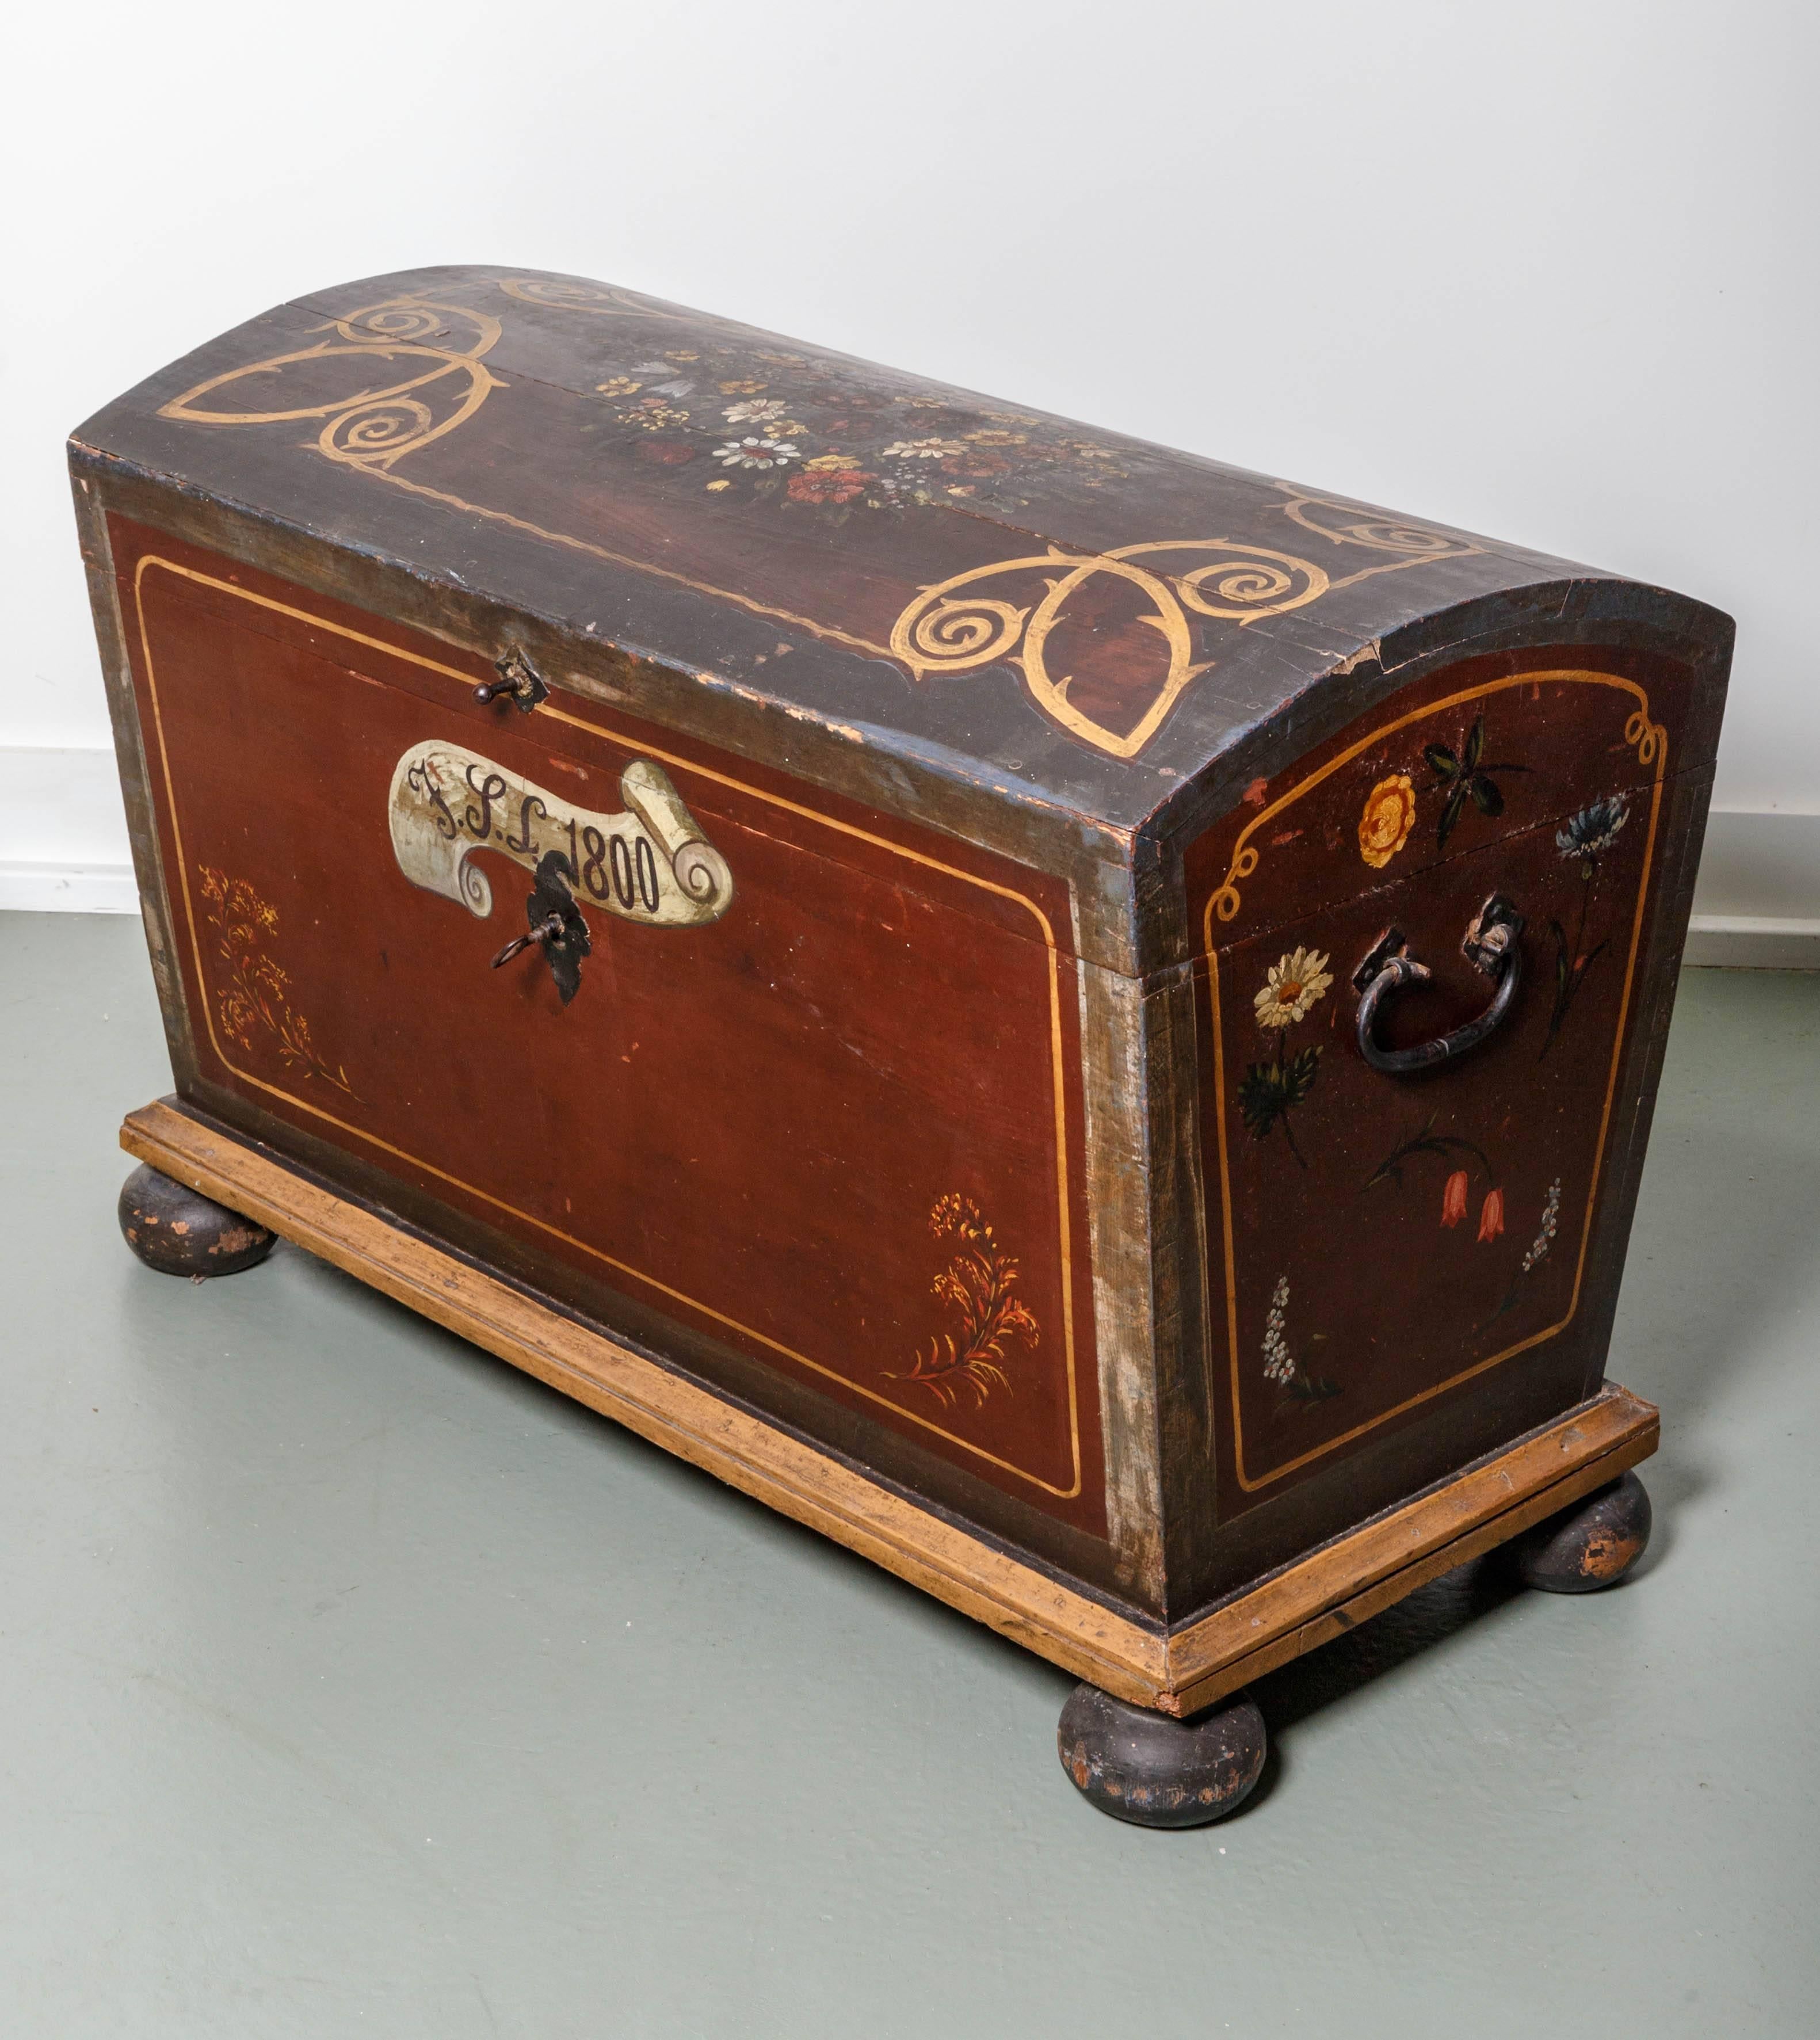 A large impressive early 1800s Scandinavian painted pine dome top trunk on bun feet. Original hardware and locking system with interior hinged candle box. Beautifully painted floral motif done in the late 19th century.